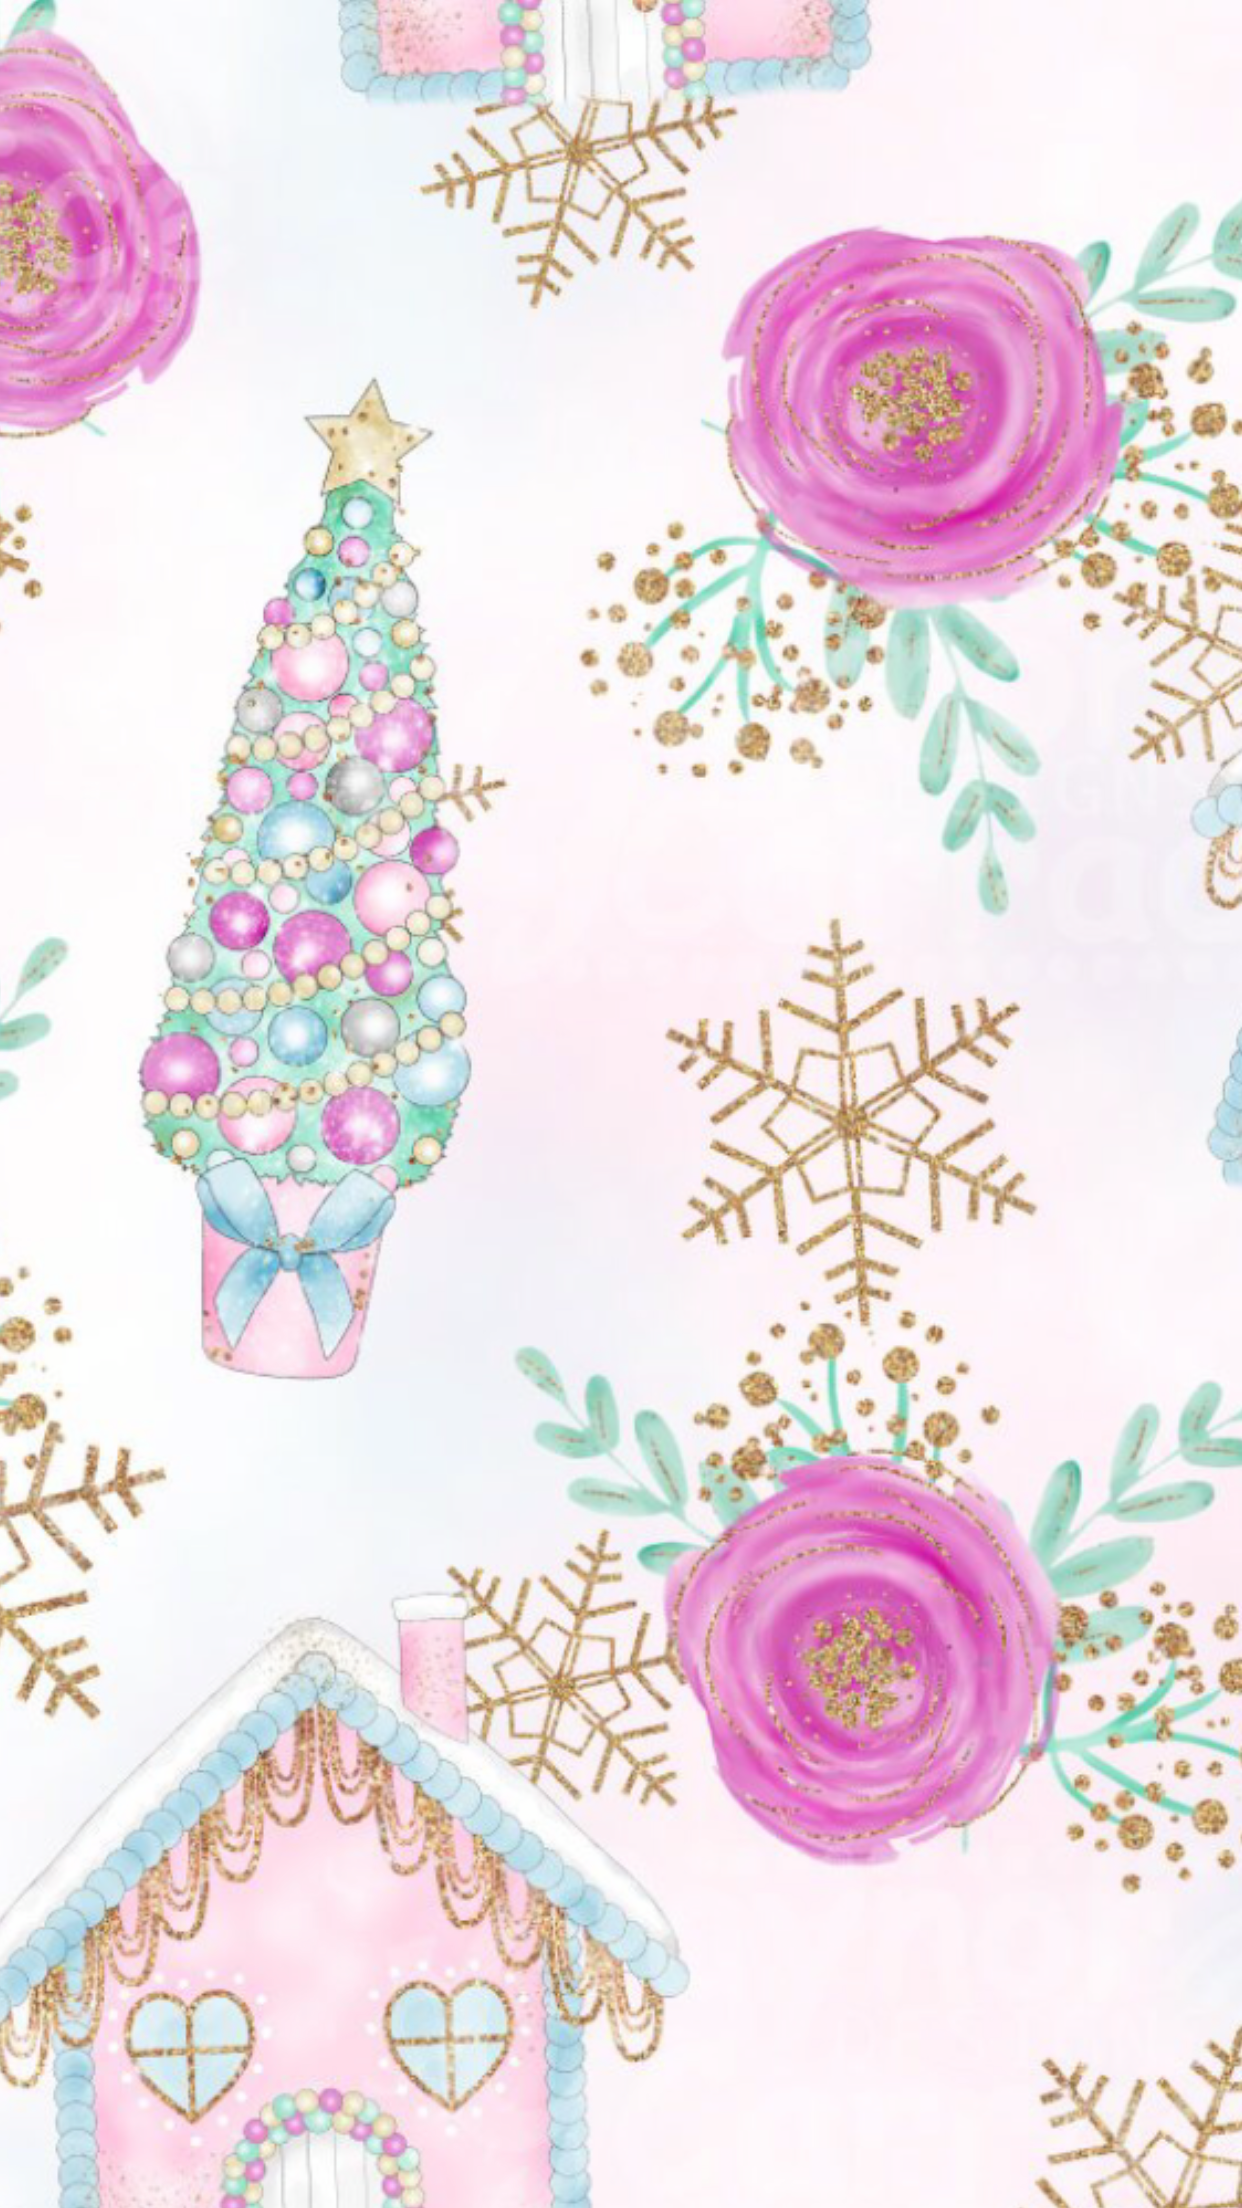 100 Amazing Christmas Wallpaper For IPhone You Must See Now  Artist Hue